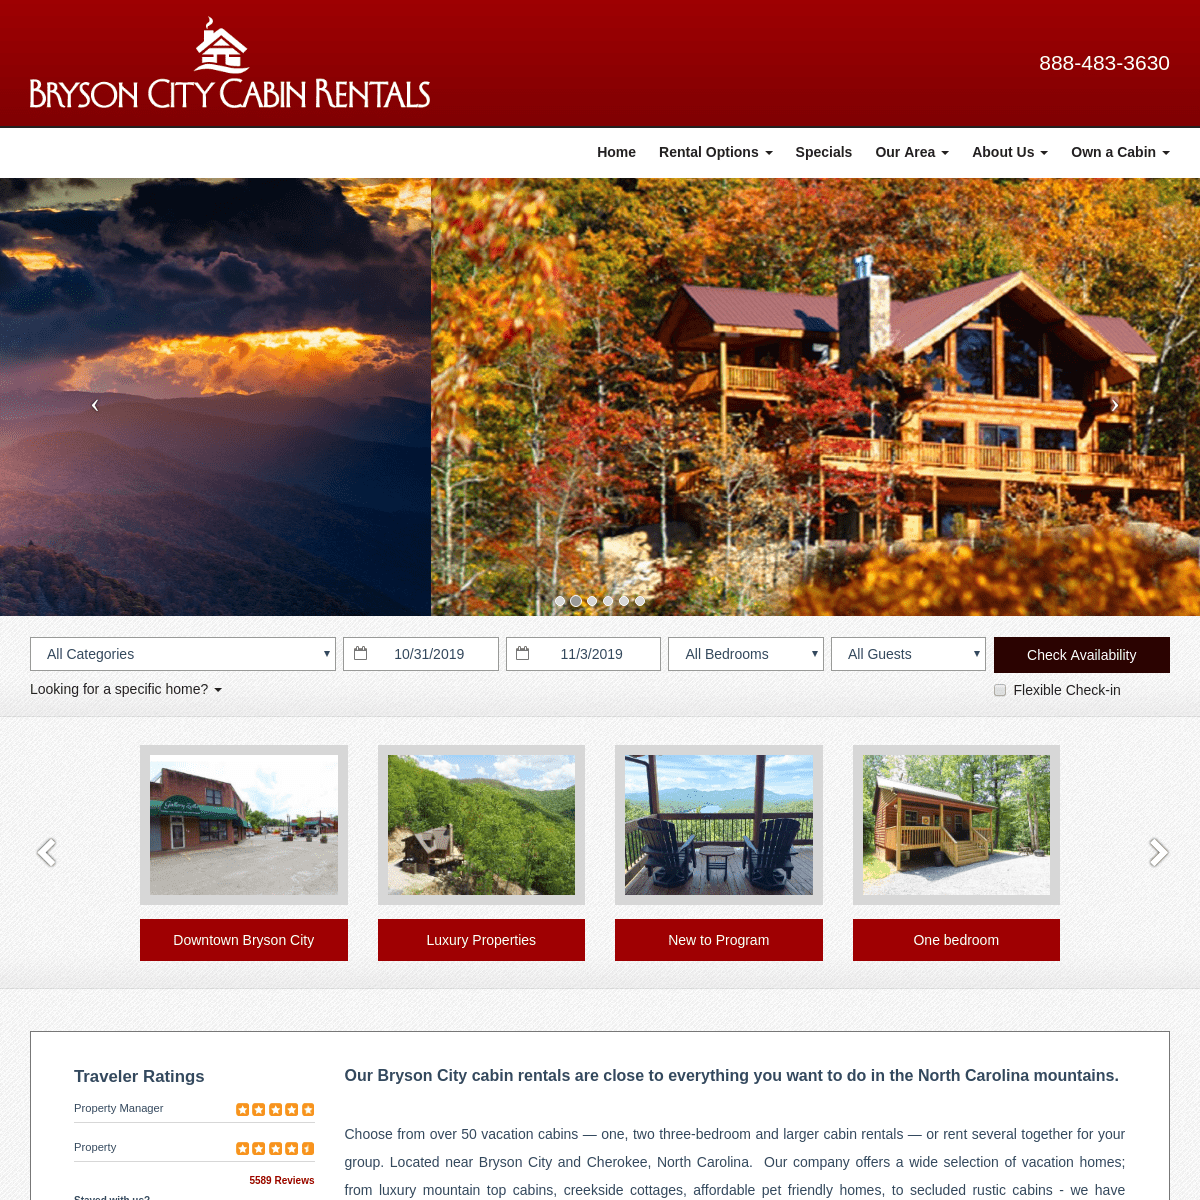 A complete backup of brysoncitycabinrentals.com